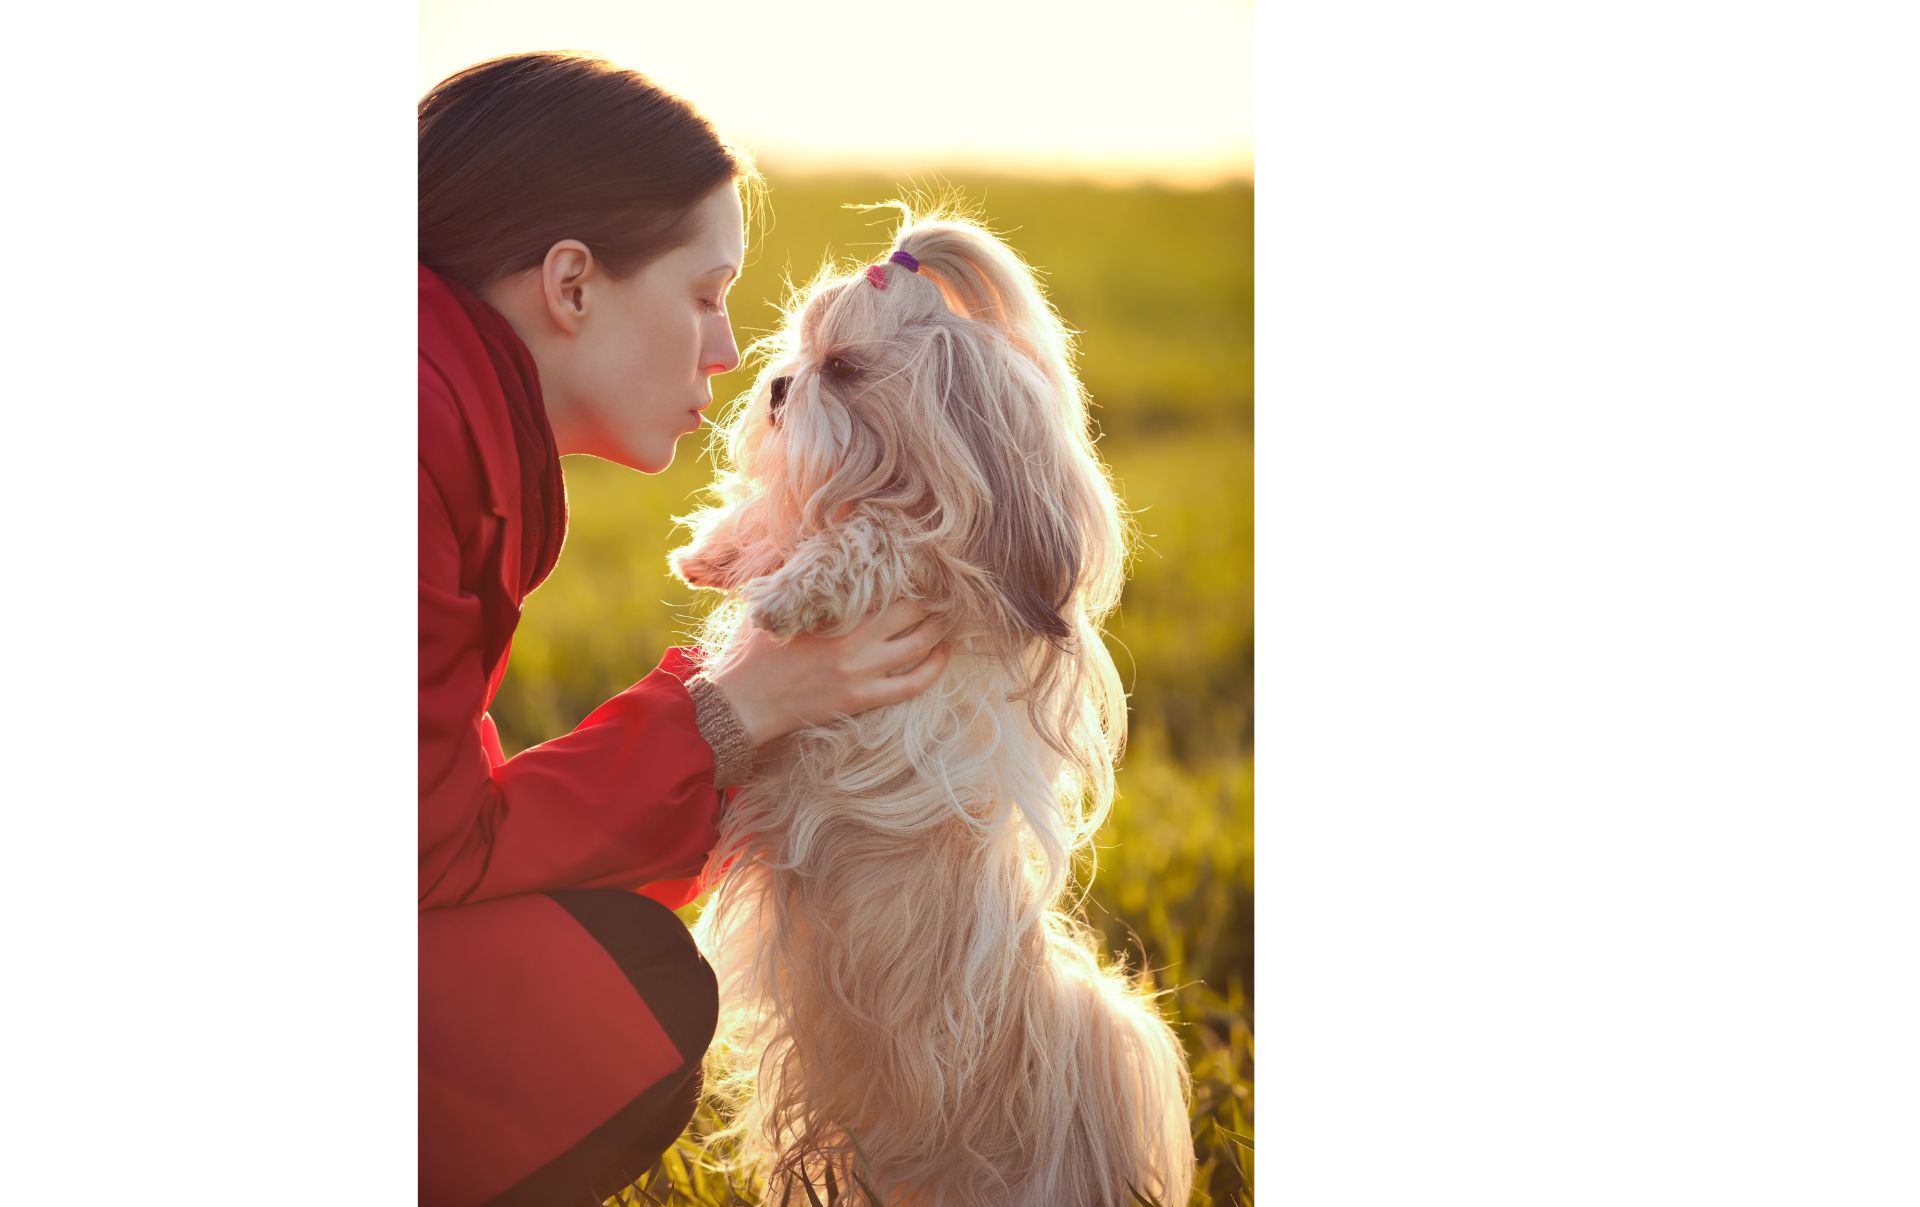 Woman in red coat leaning down having conversation with her Shih Tzu